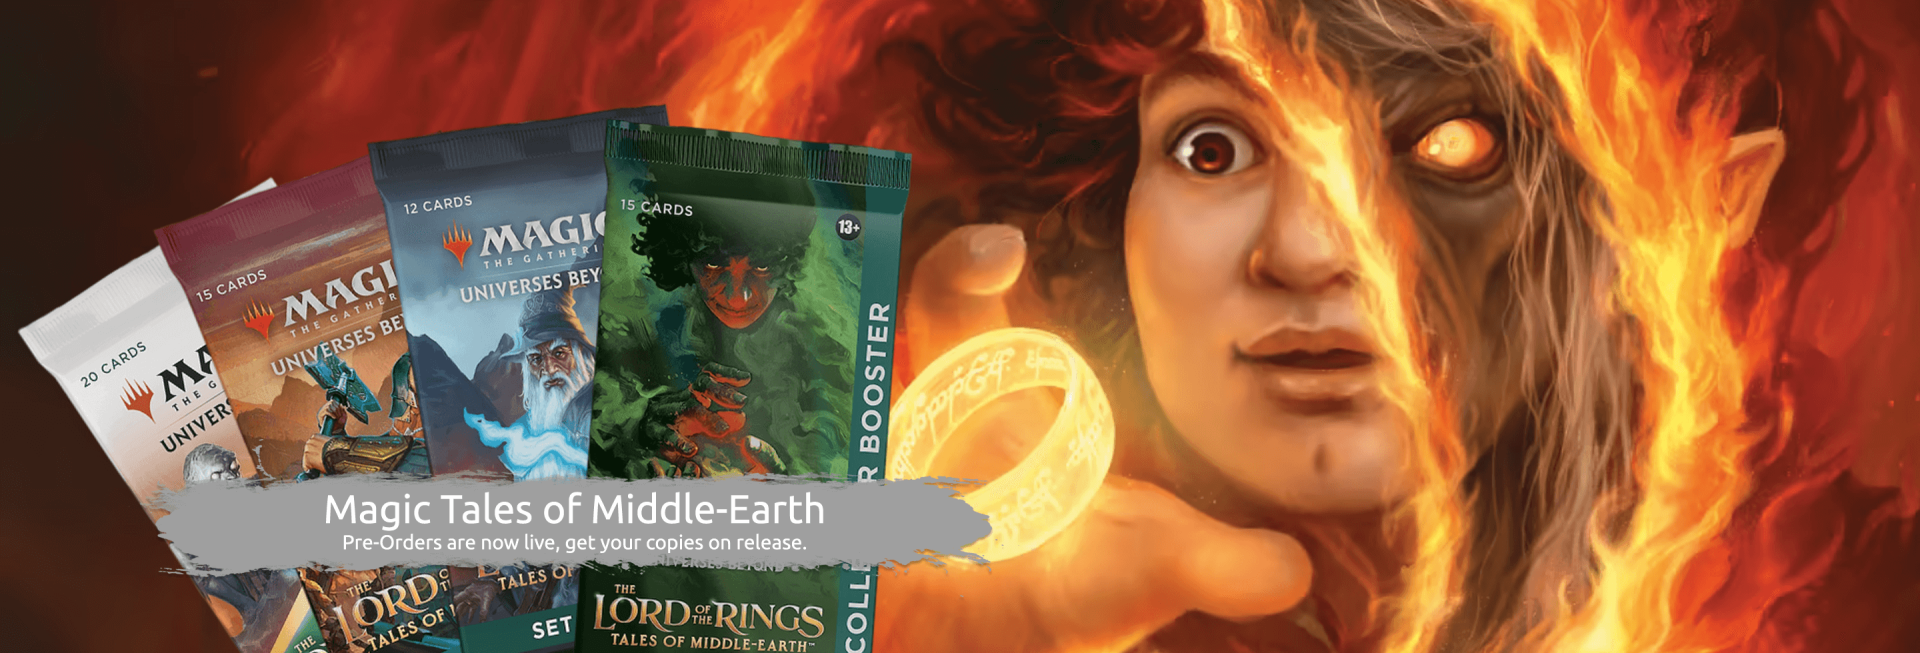 Lord of the Rings Tales of Middle-Earth Magic the Gathering